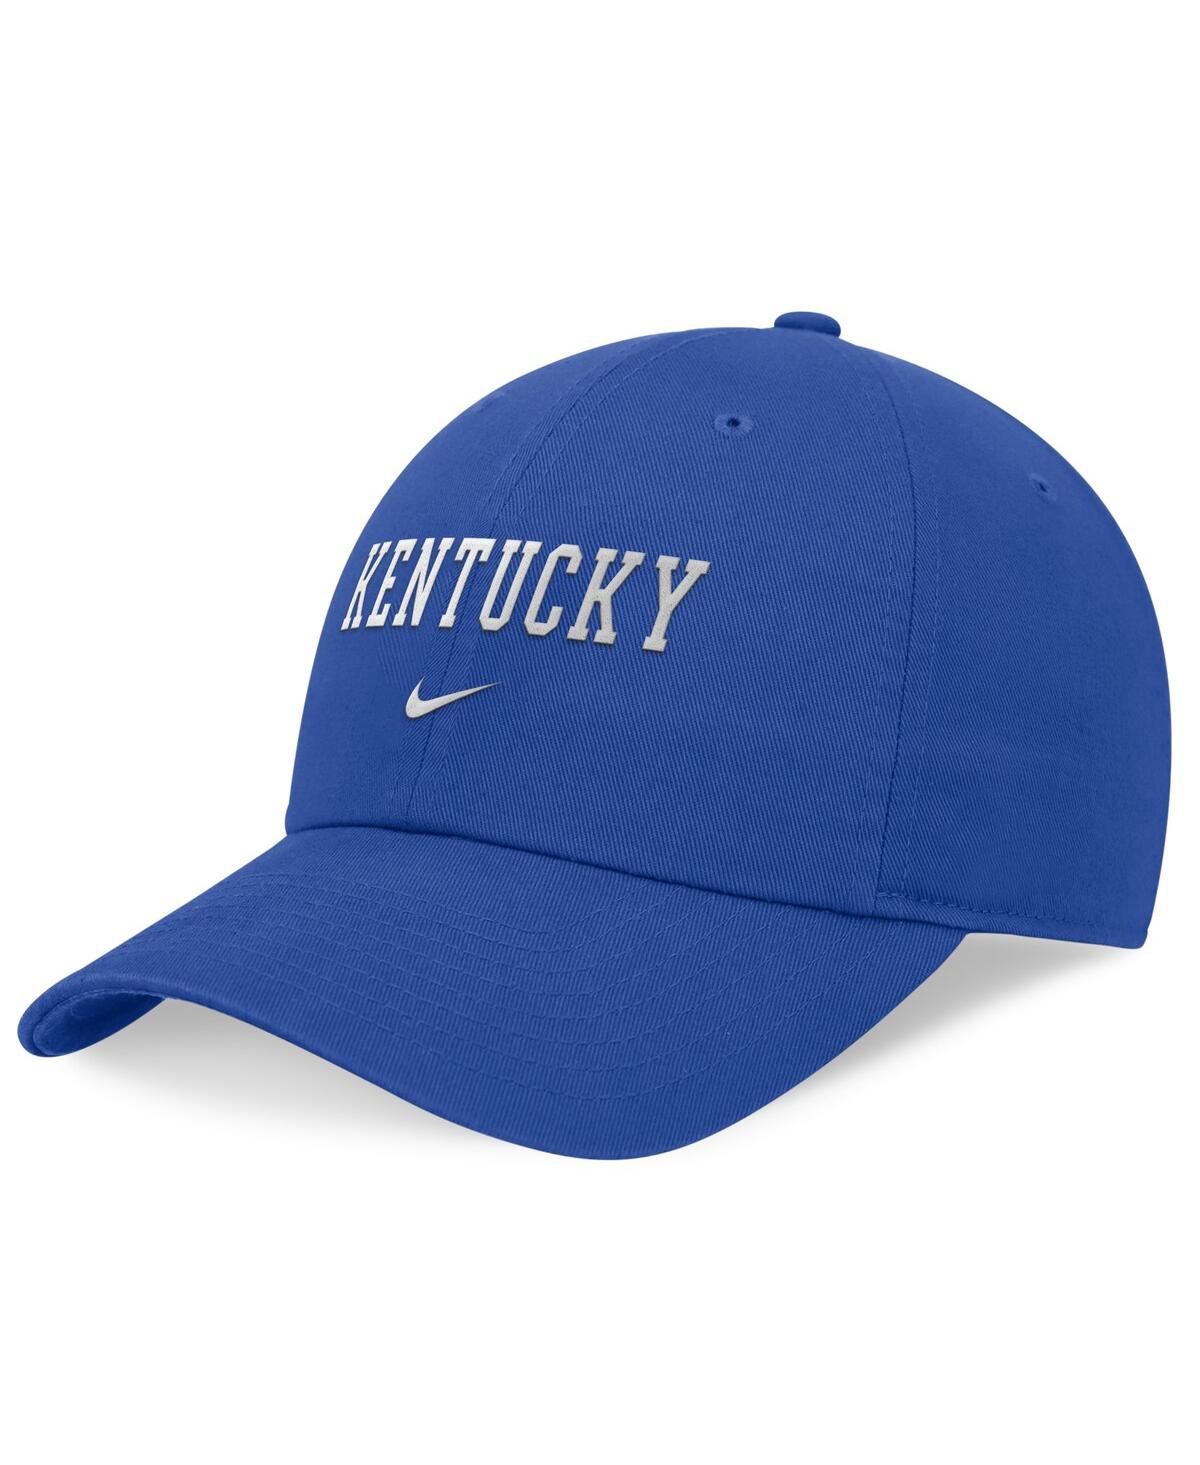 Men's and Women's Royal Kentucky Wildcats 2024 Sideline Club Adjustable Hat - Royal